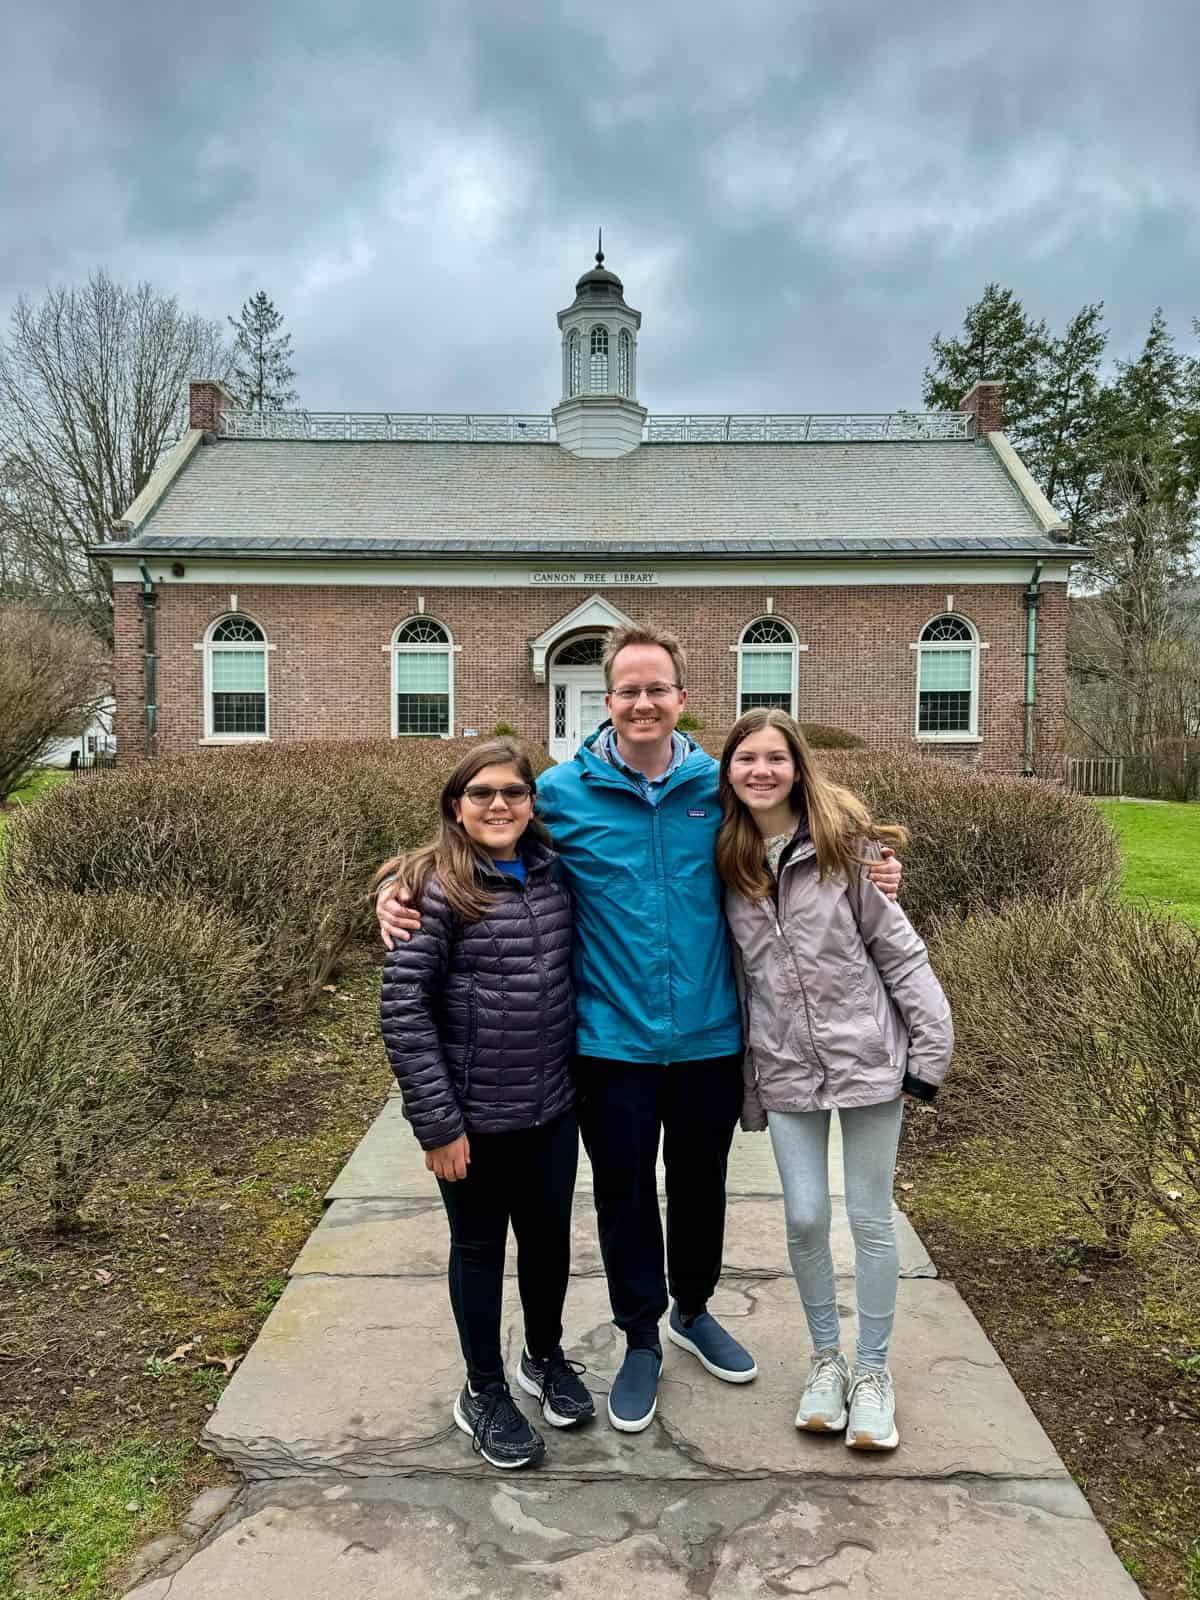 A dad and two daughters in front of the Cannon Free Library from the book "My Side of the Mountain" in upstate New York.